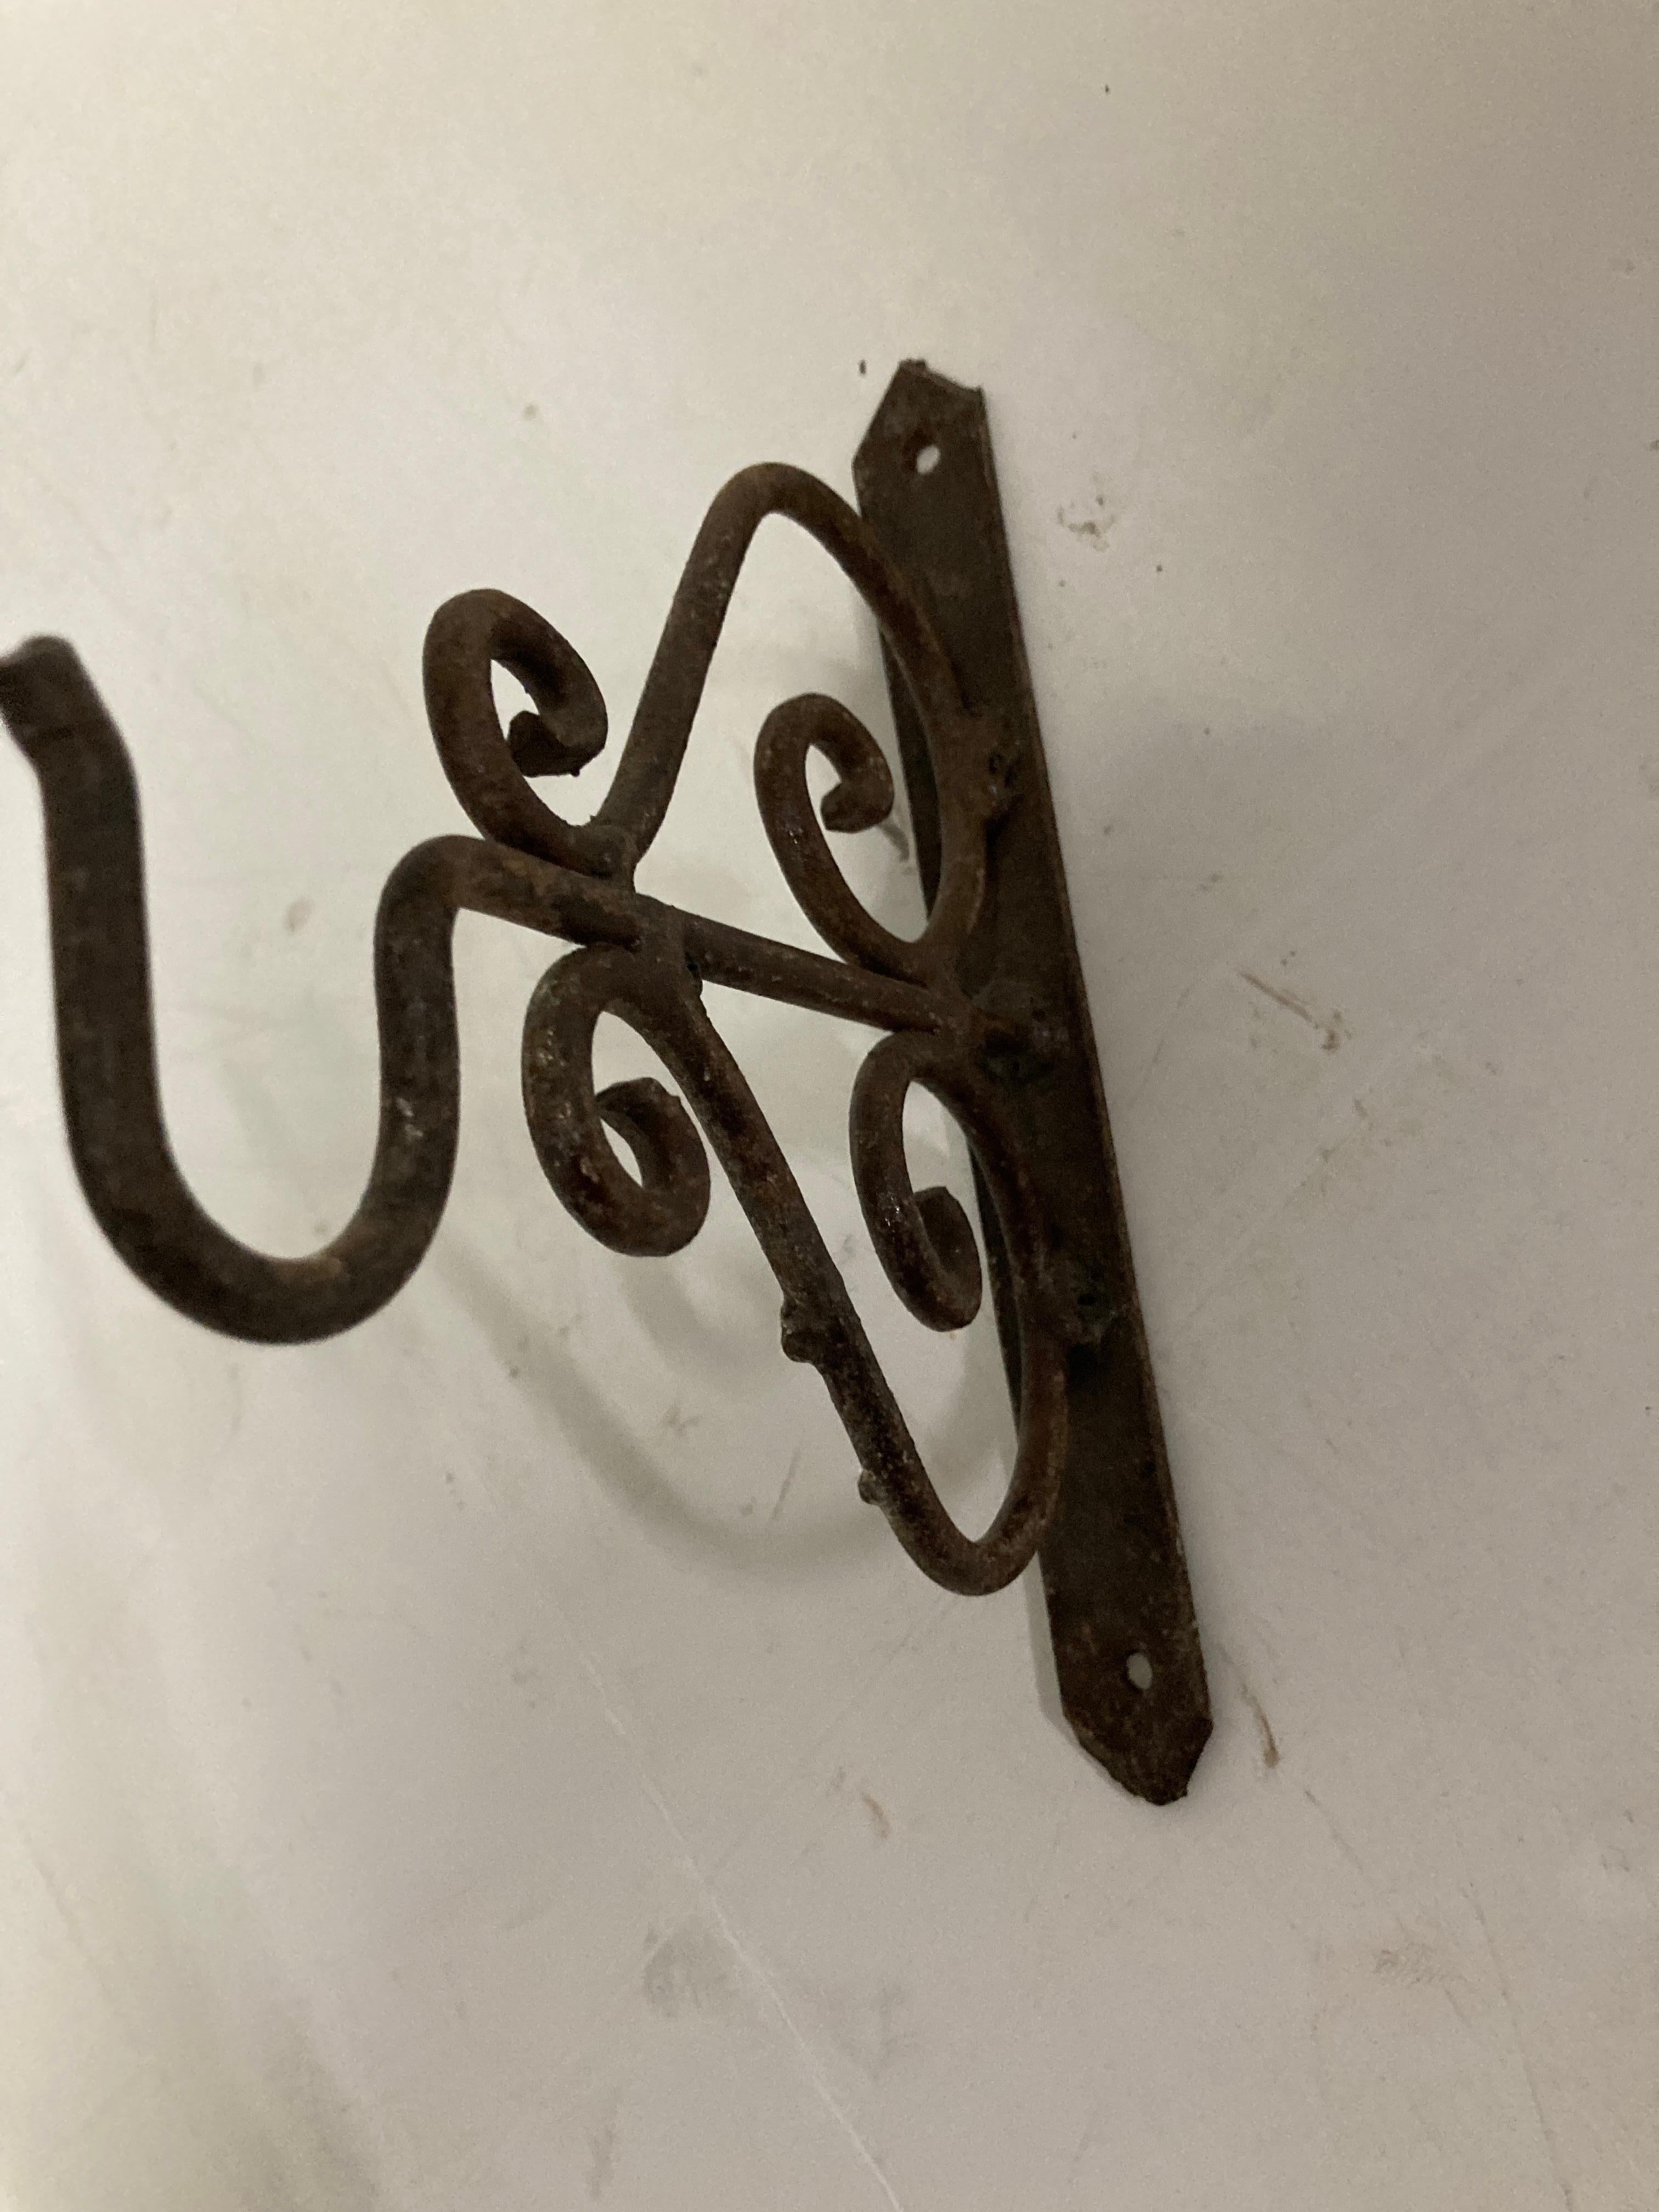 Scrolling Wall Mounted Iron Bracket for Lanterns or Signs In Good Condition For Sale In North Hollywood, CA